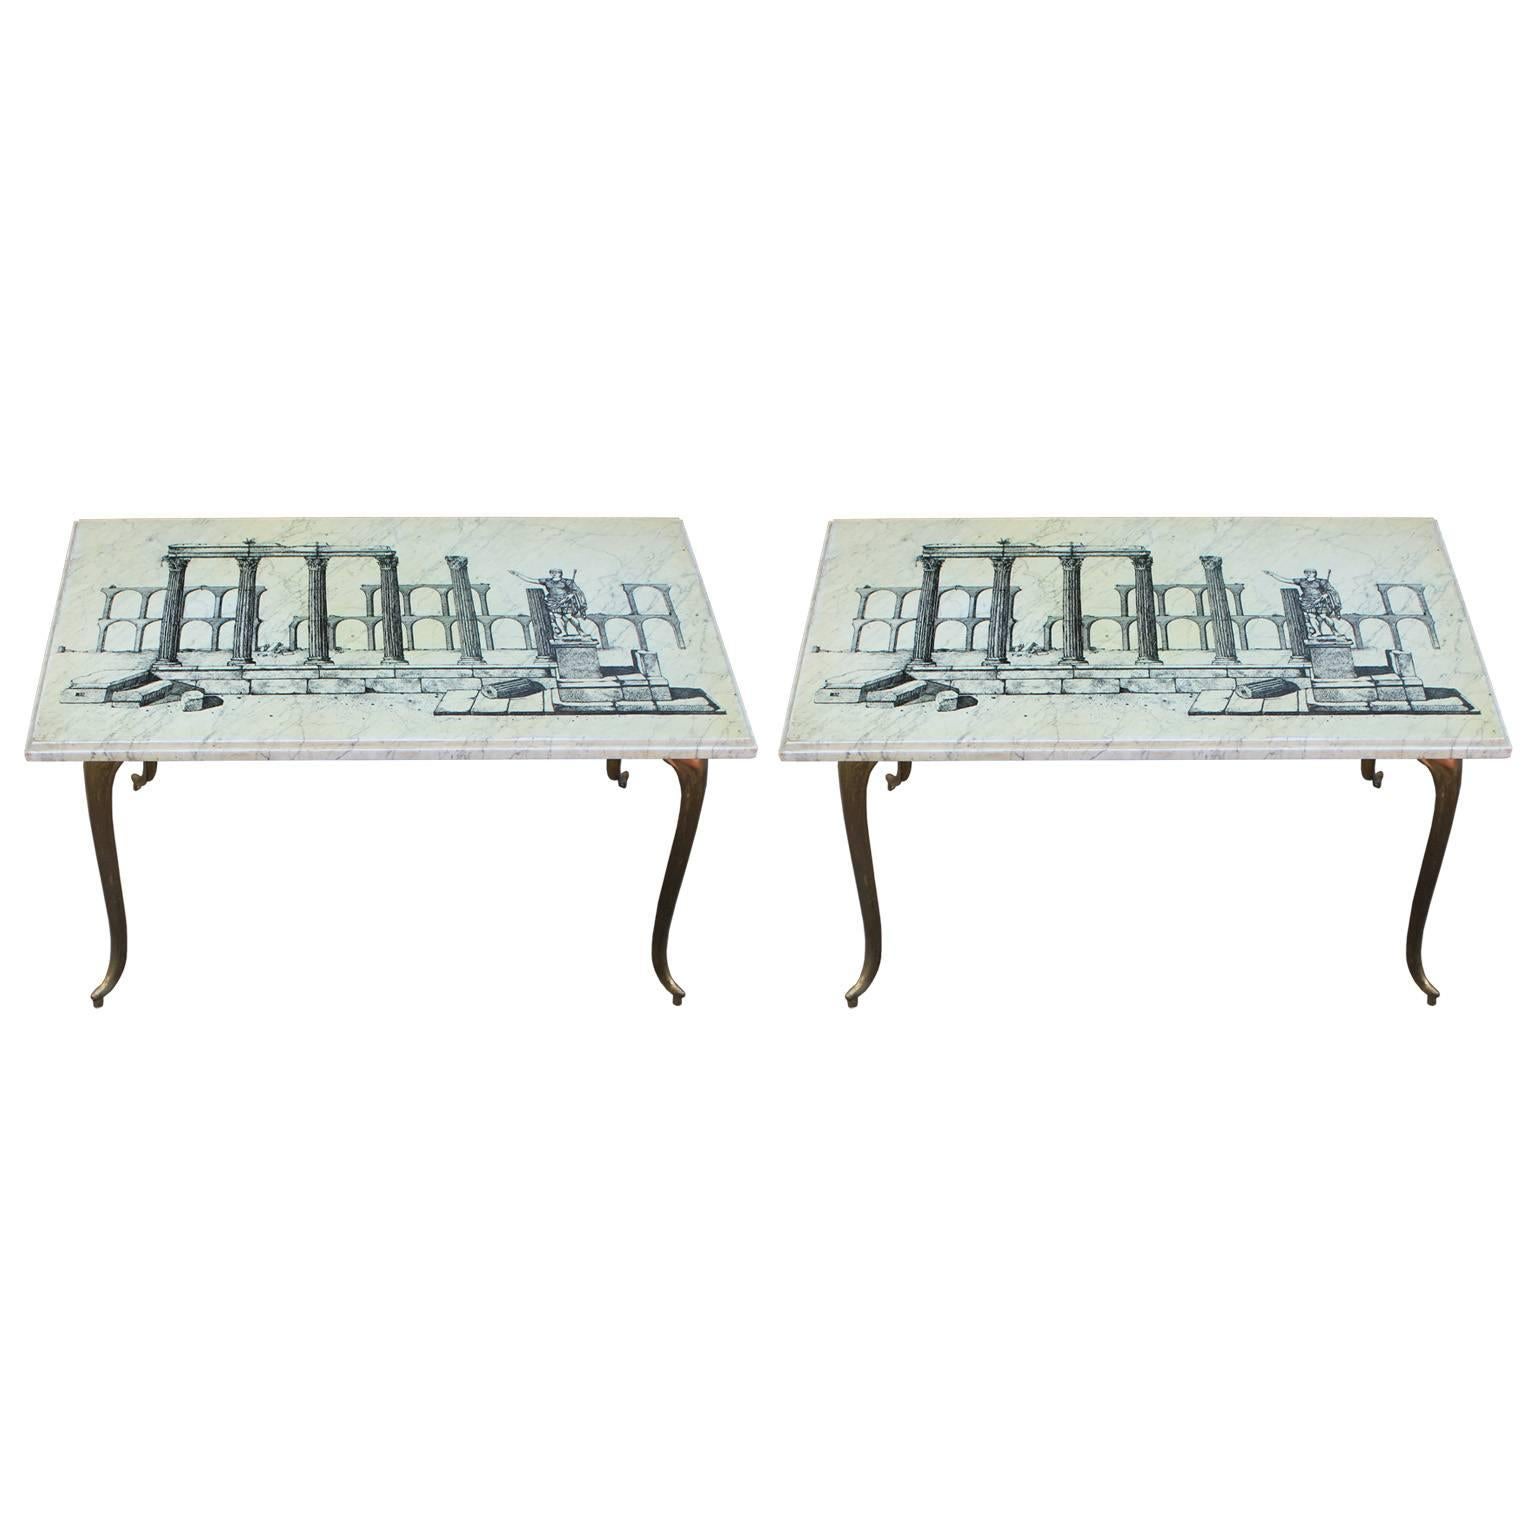 Pair of Italian Marble and Brass Modern Side Tables with Aqueduct Motif